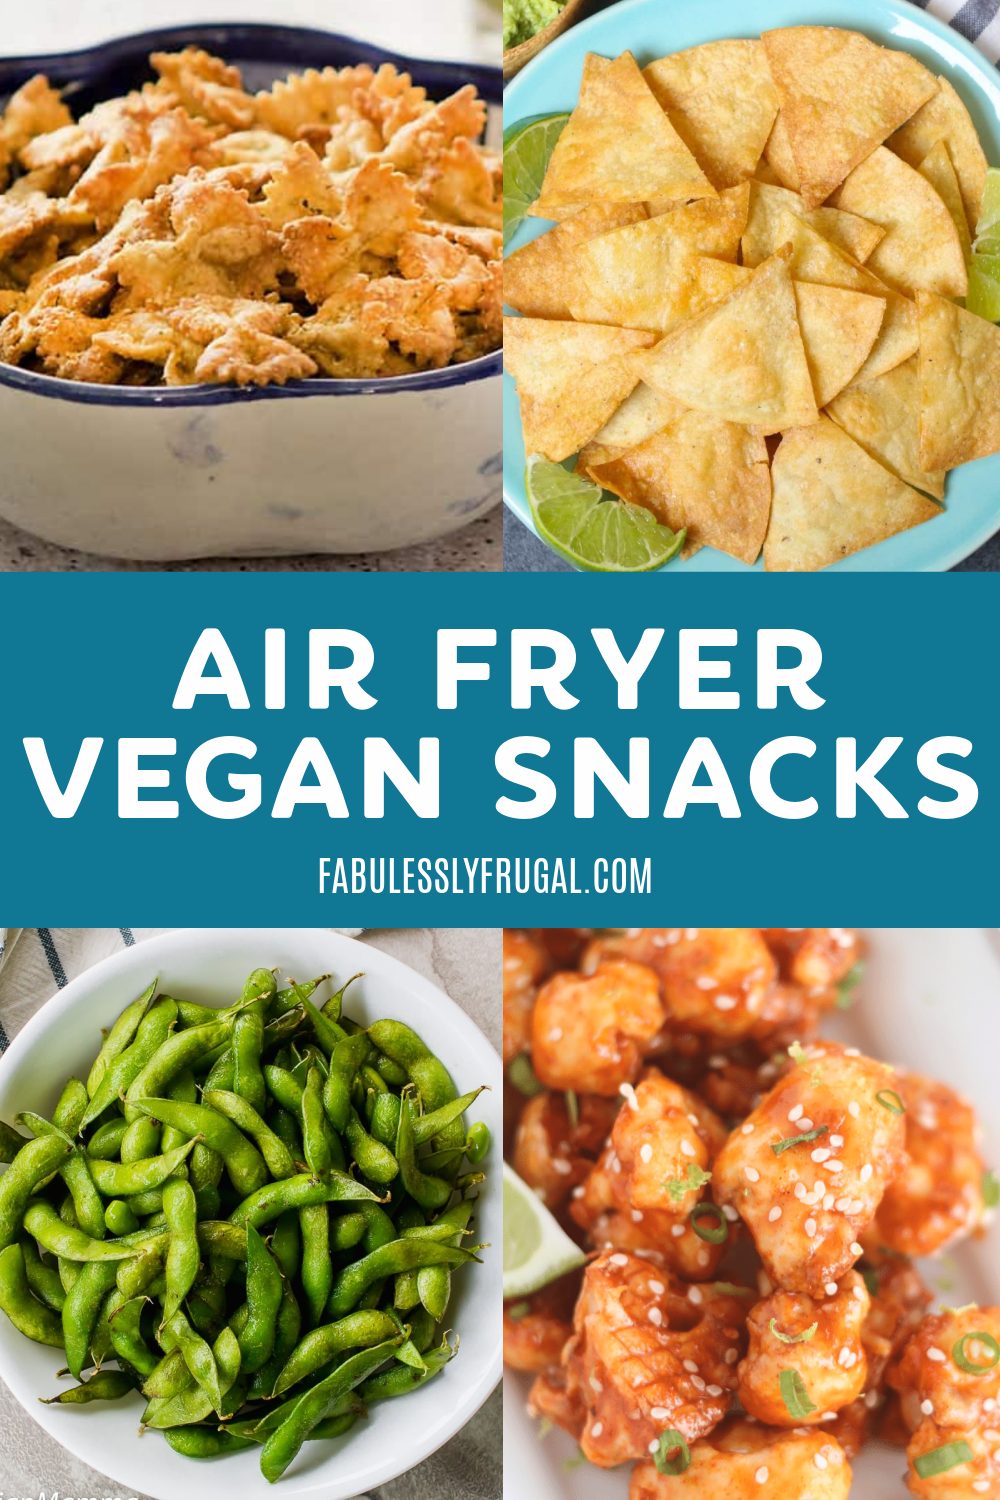 air fryer vegan snacks that are quick, healthy, and tasty